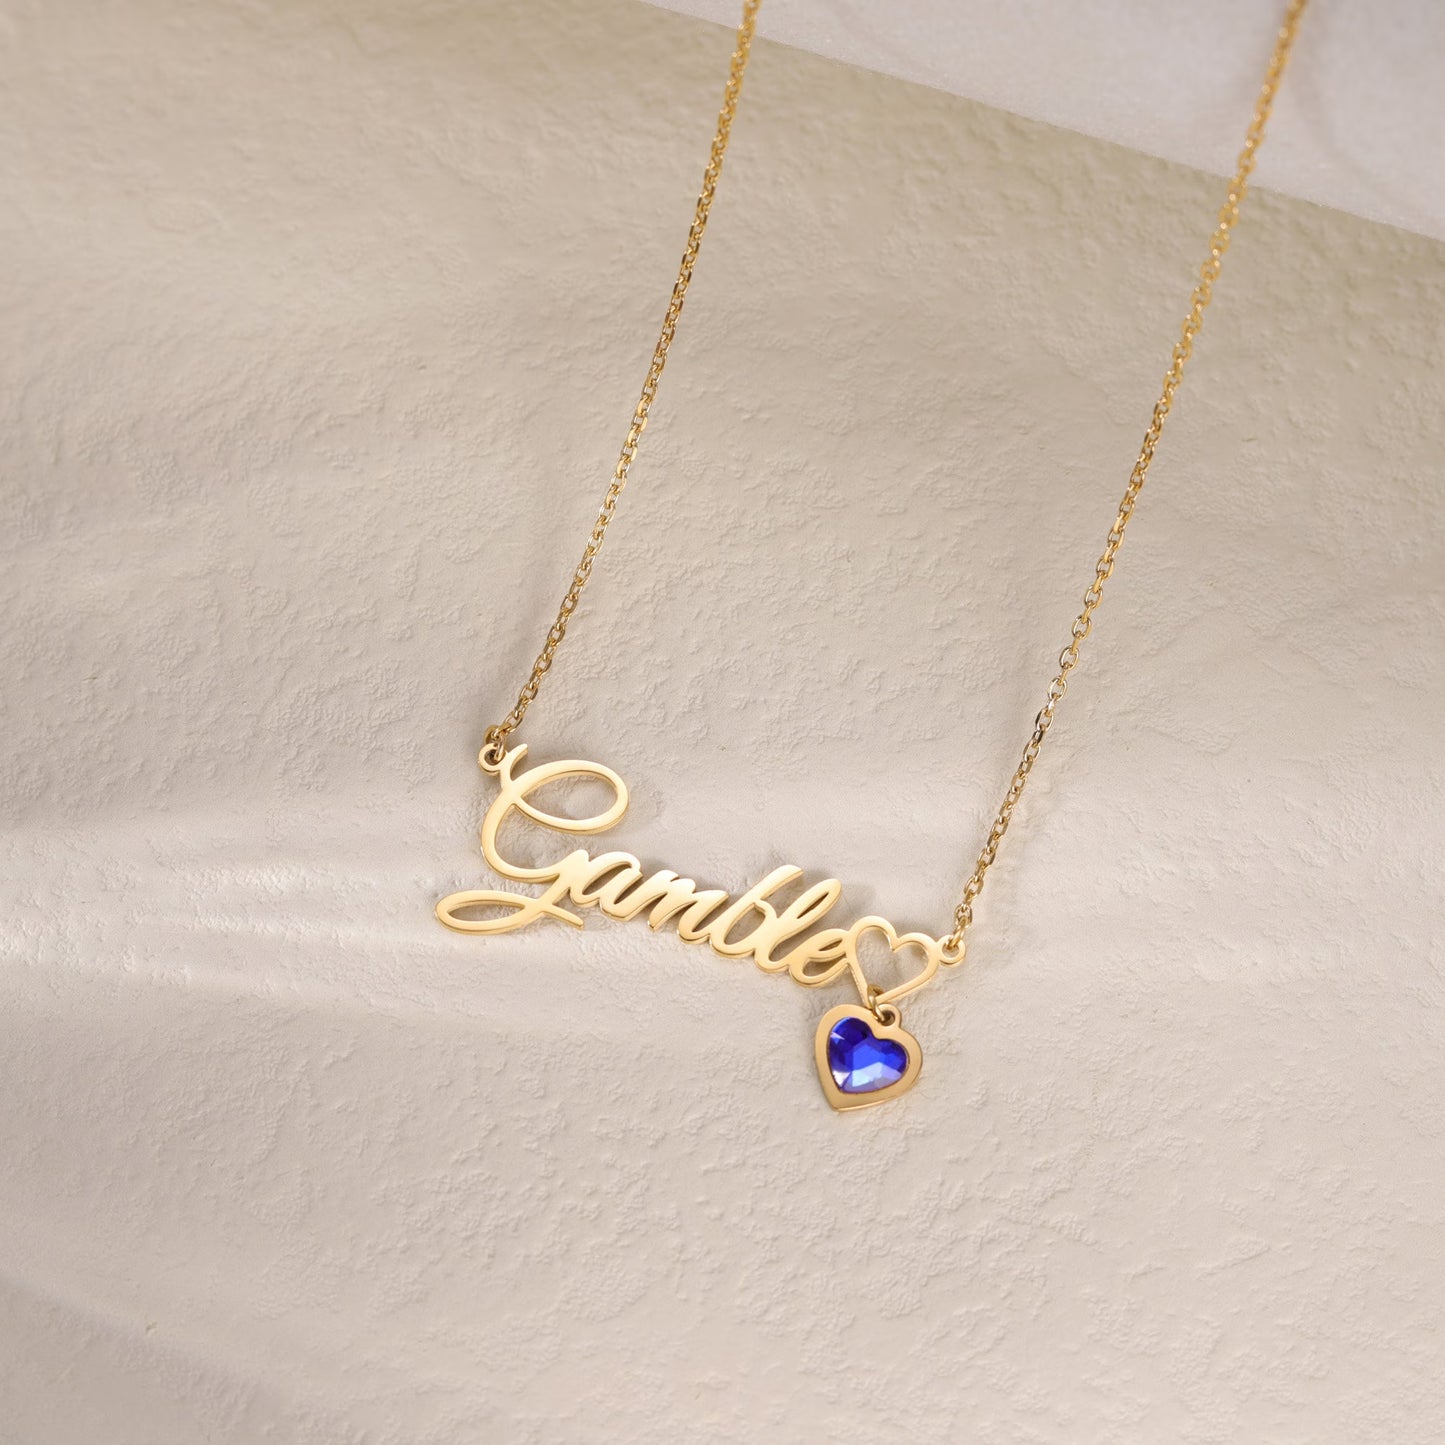 Heart-Shaped Birthstone Name Necklace